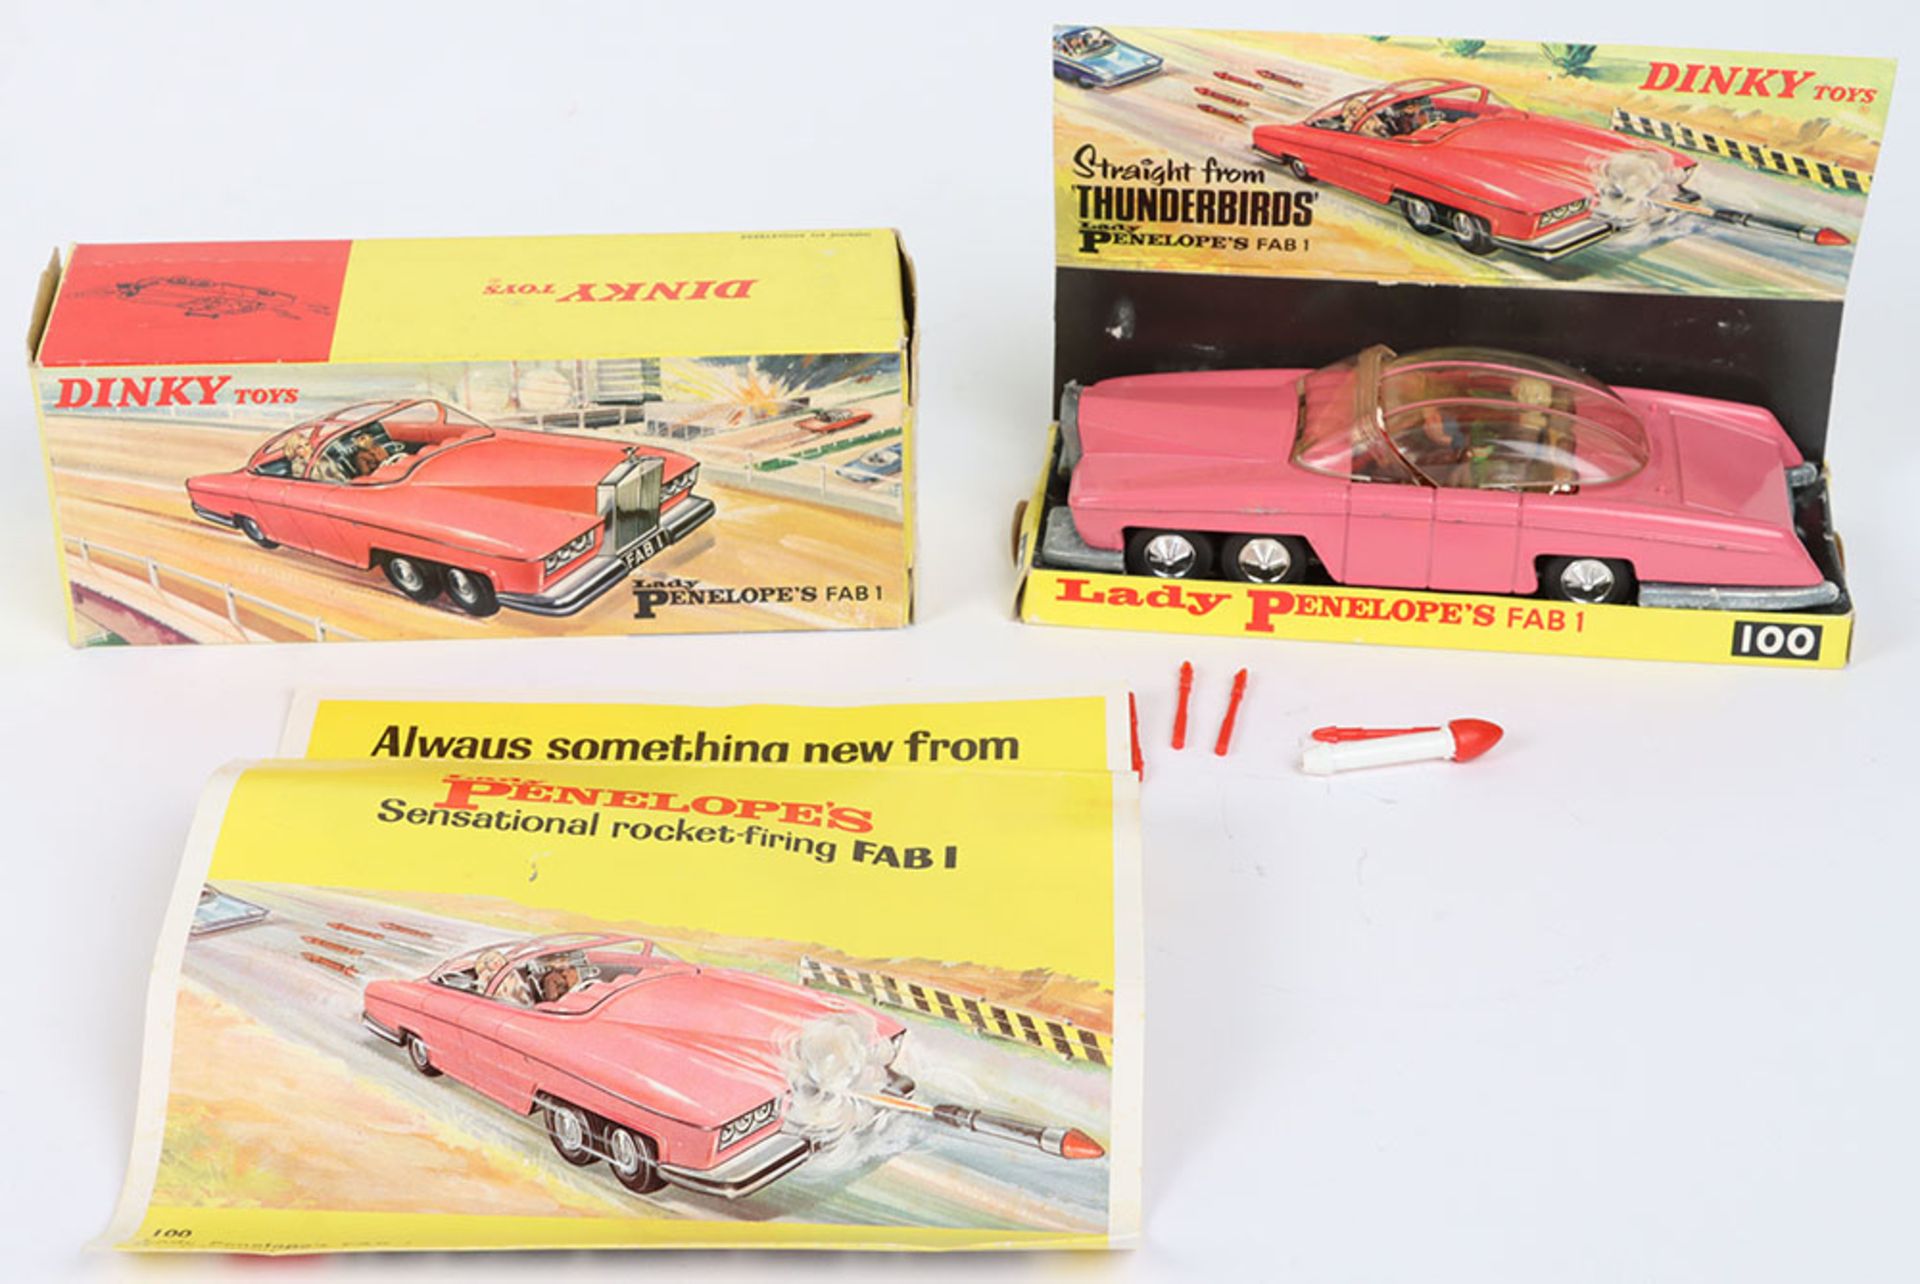 Dinky Toys Boxed 100 Lady Penelope’s FAB 1 From TV series ‘Thunderbirds’ - Image 2 of 4